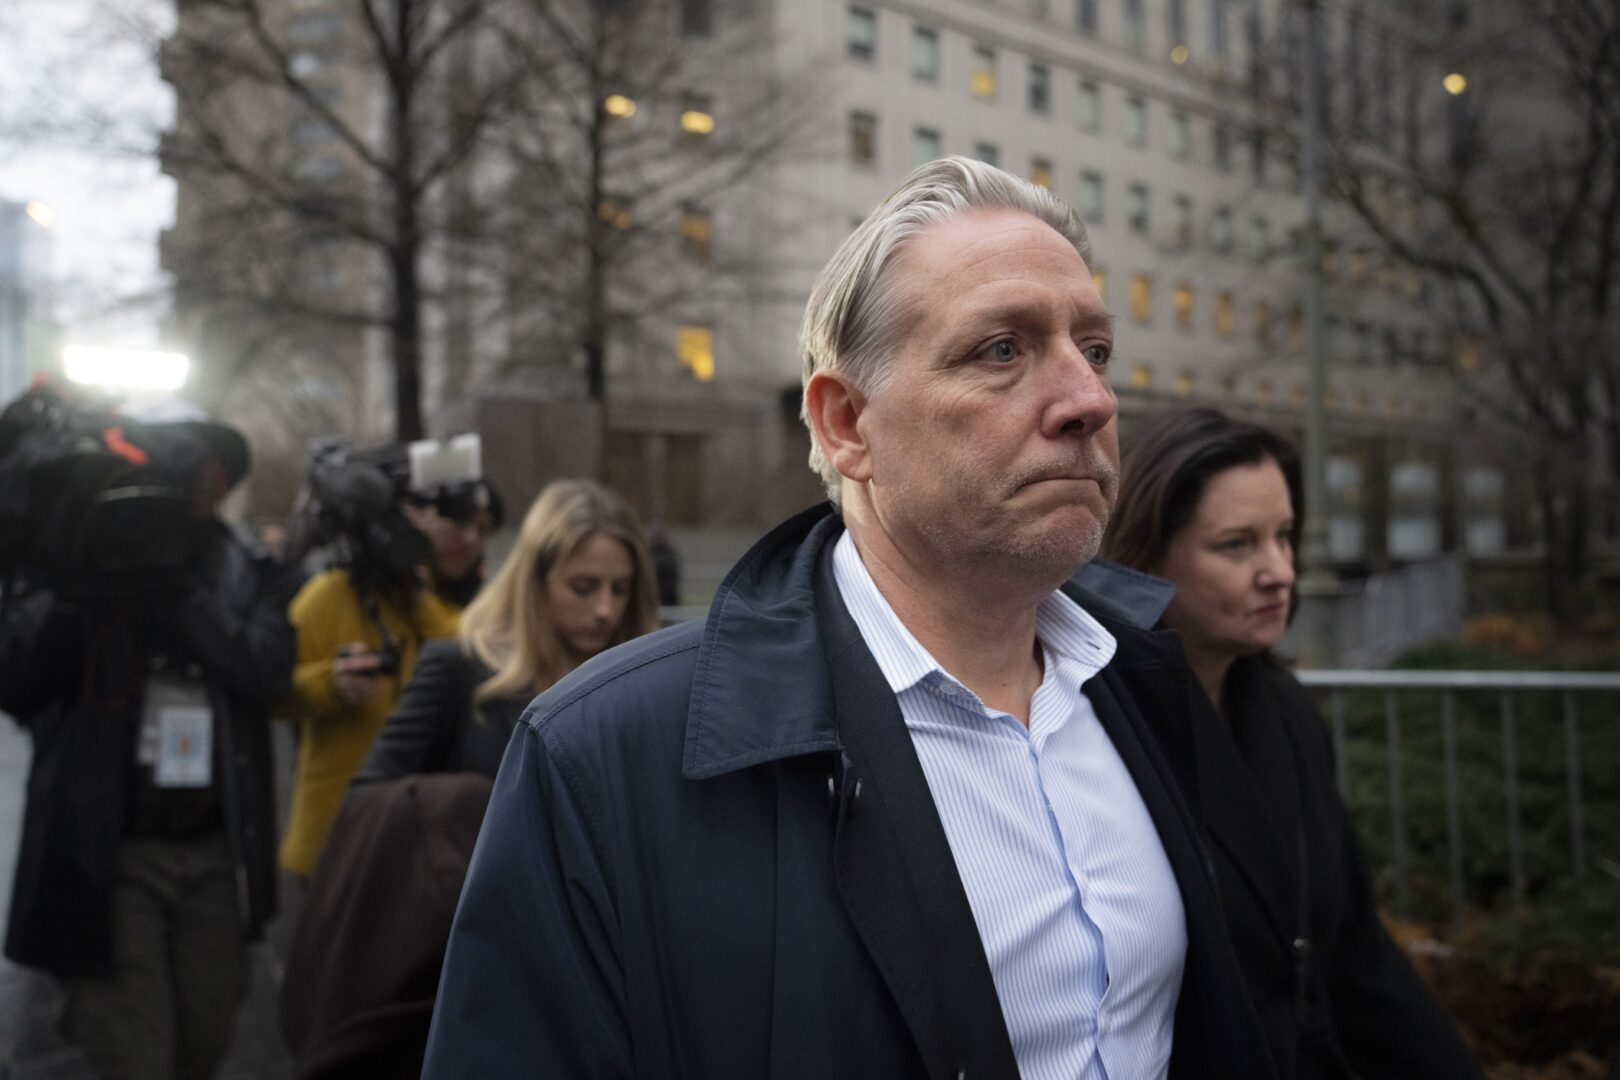 Charles McGonigal, former special agent in charge of the FBI's counterintelligence division in New York, leaves court, Monday, Jan. 23, 2023, in New York. The former high-ranking FBI counterintelligence official has been indicted on charges he helped a Russian oligarch, in violation of U.S. sanctions. 